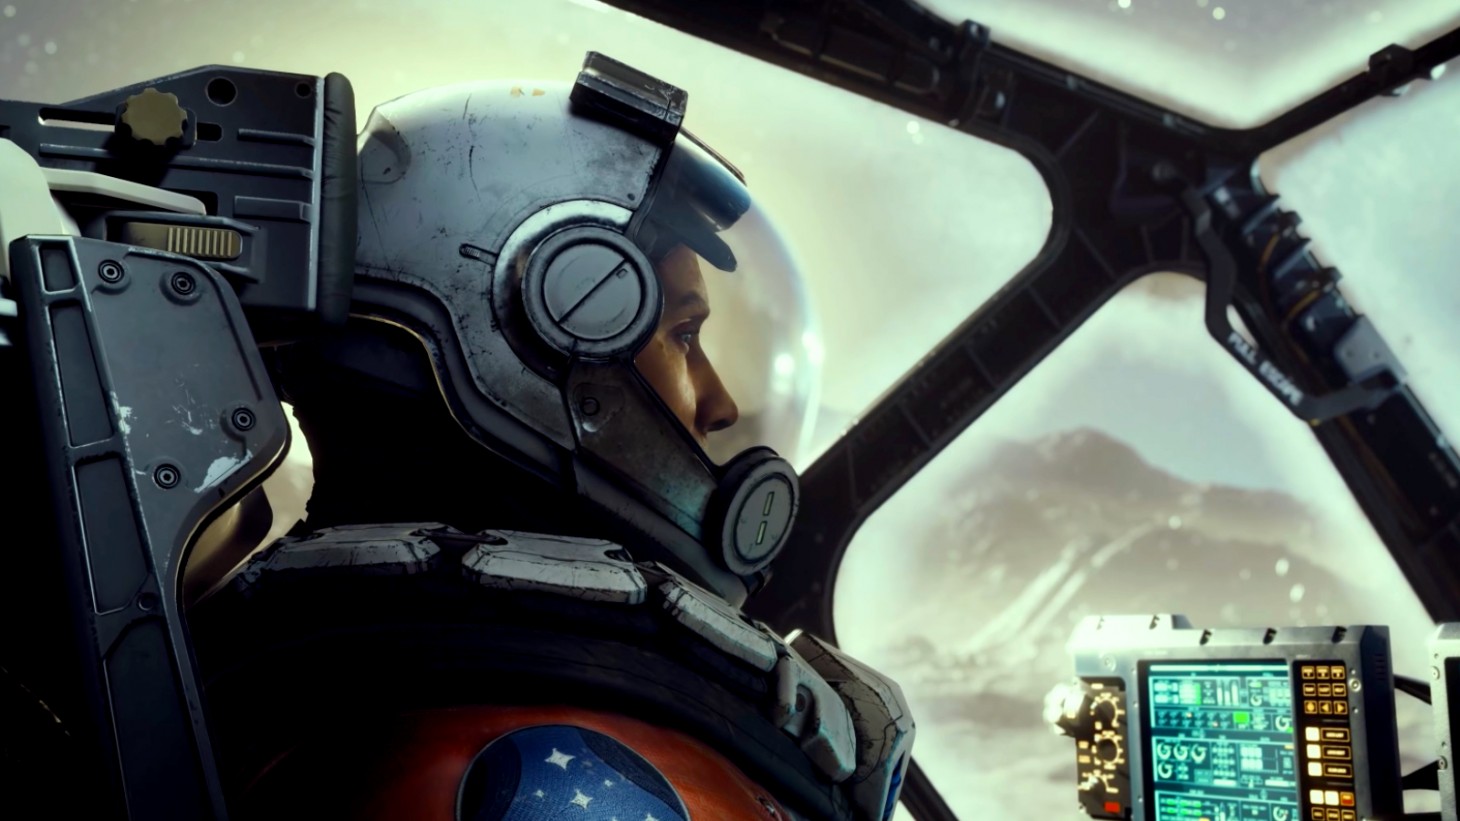 What Have We Learned From Titanfall, Watch Dogs, And Destiny?